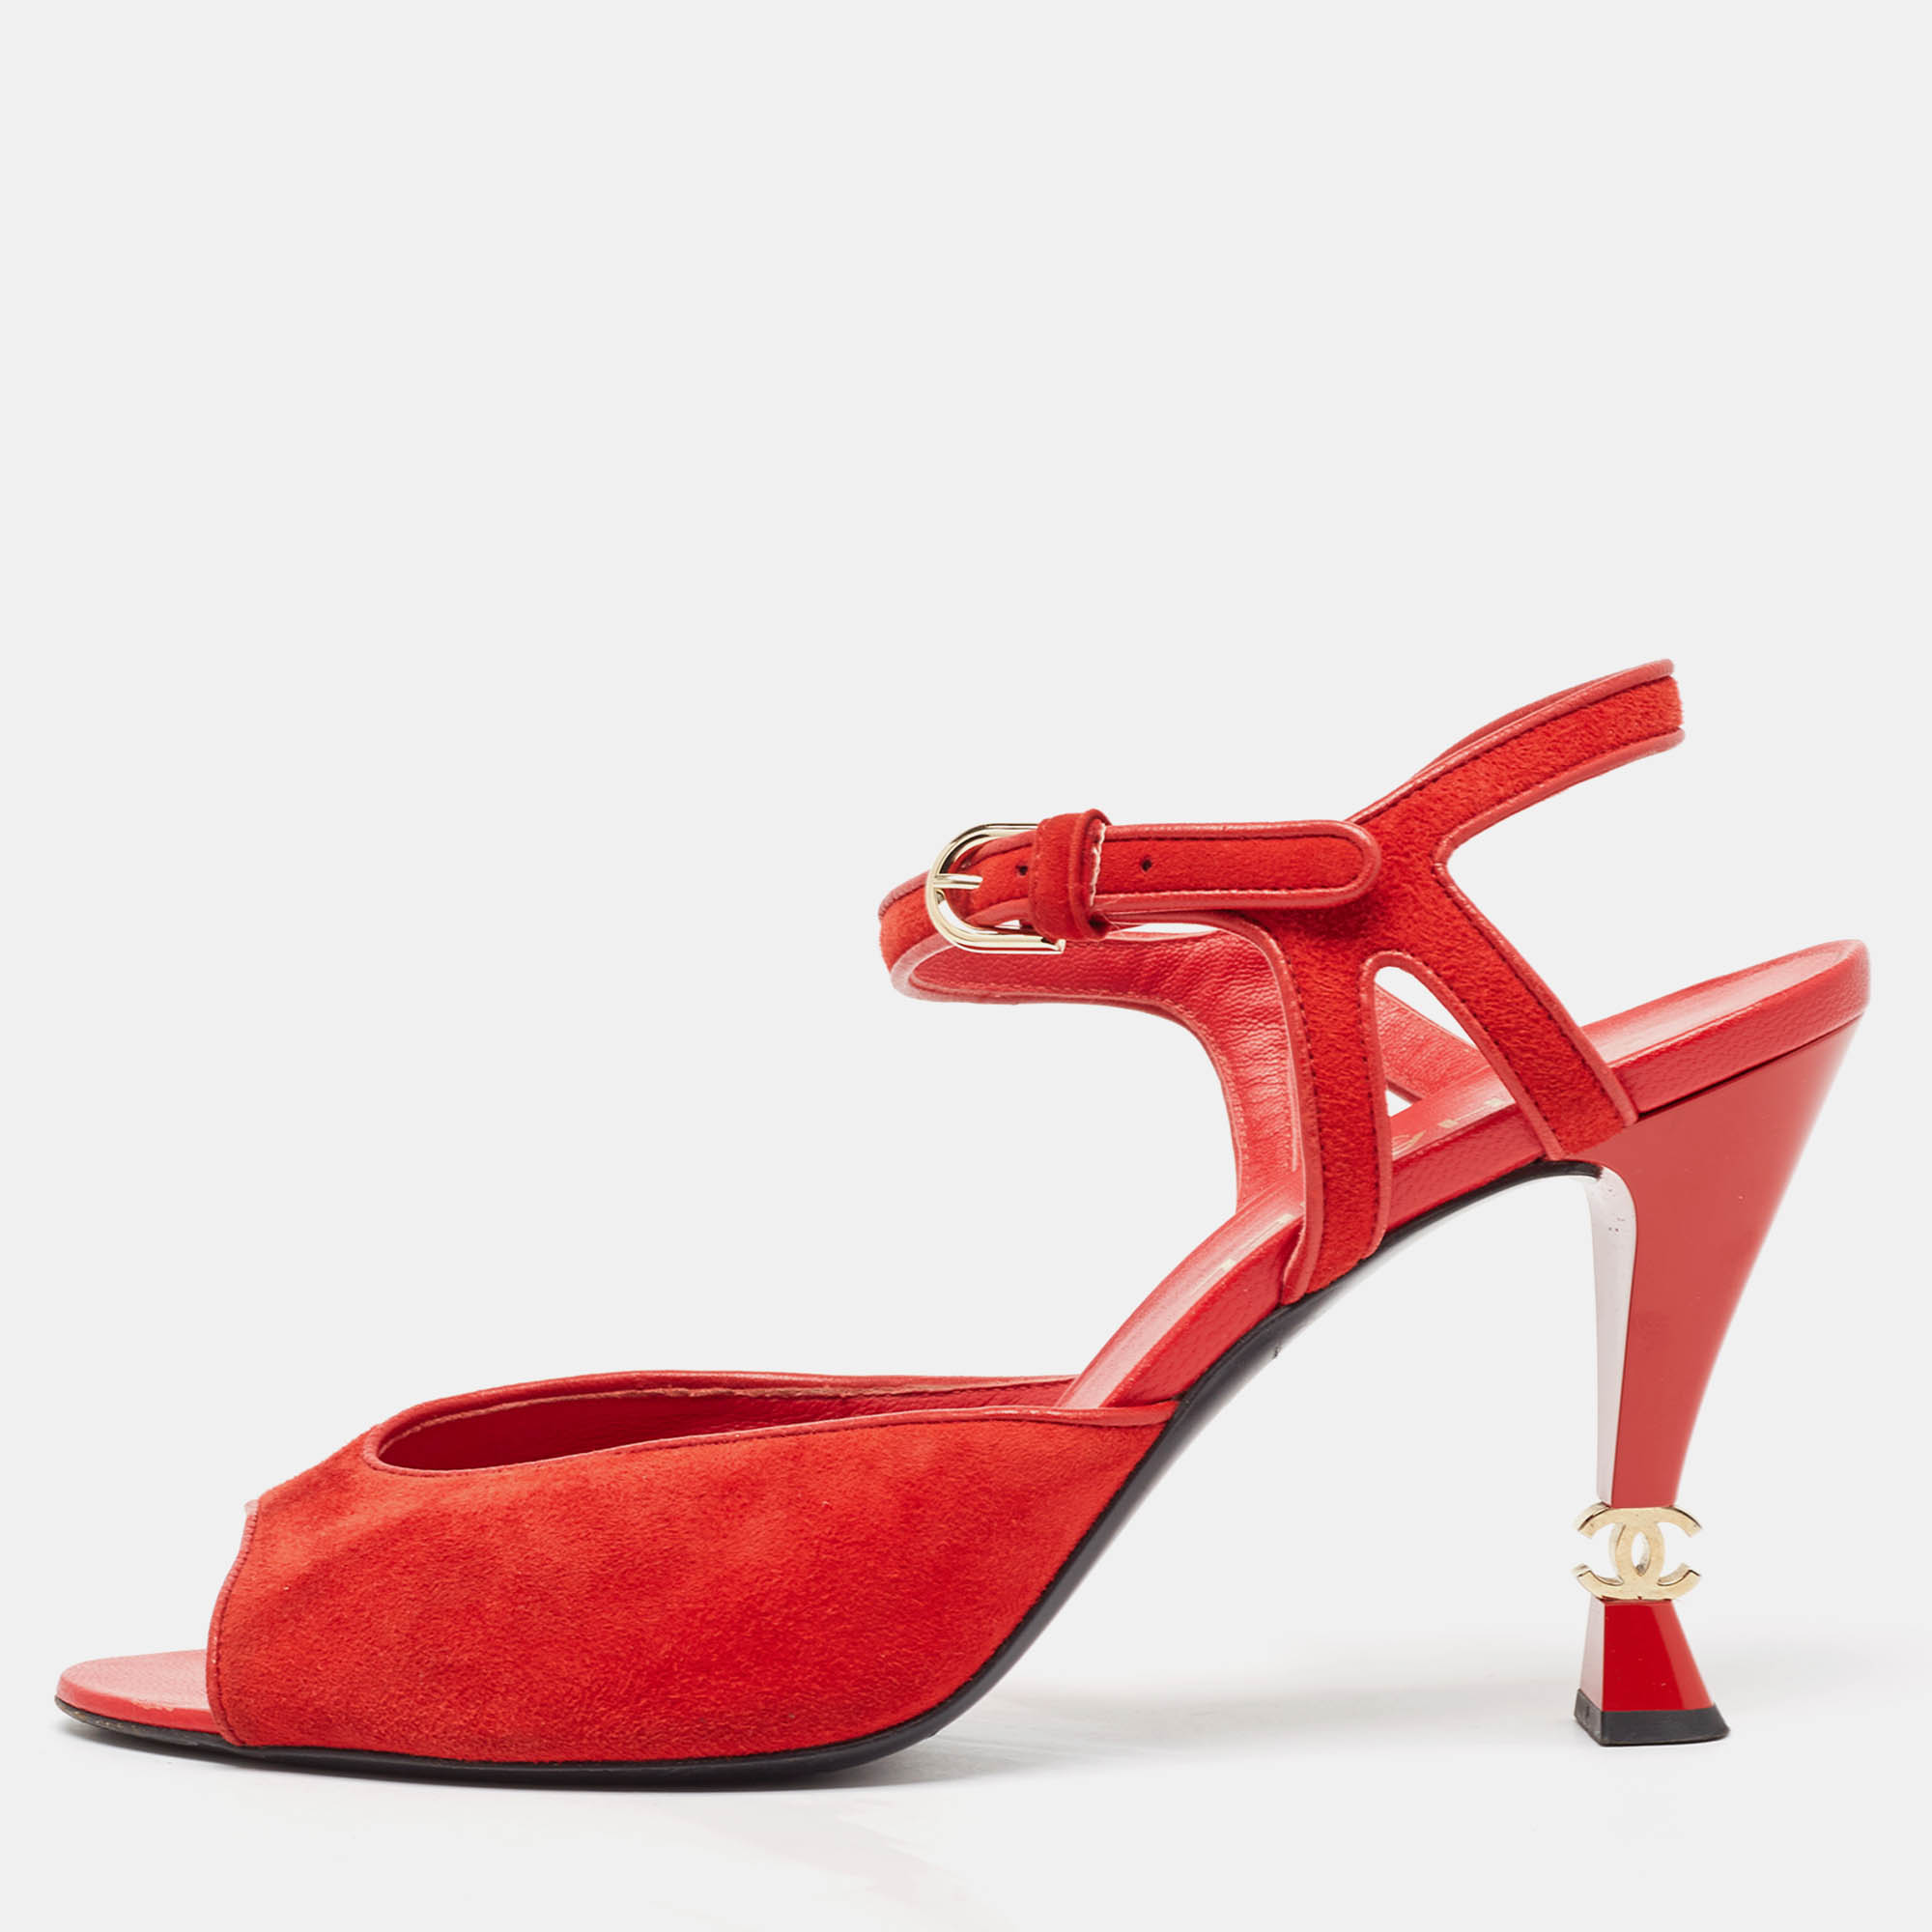 Chanel red suede open toe cc heel ankle strap sandals size 40